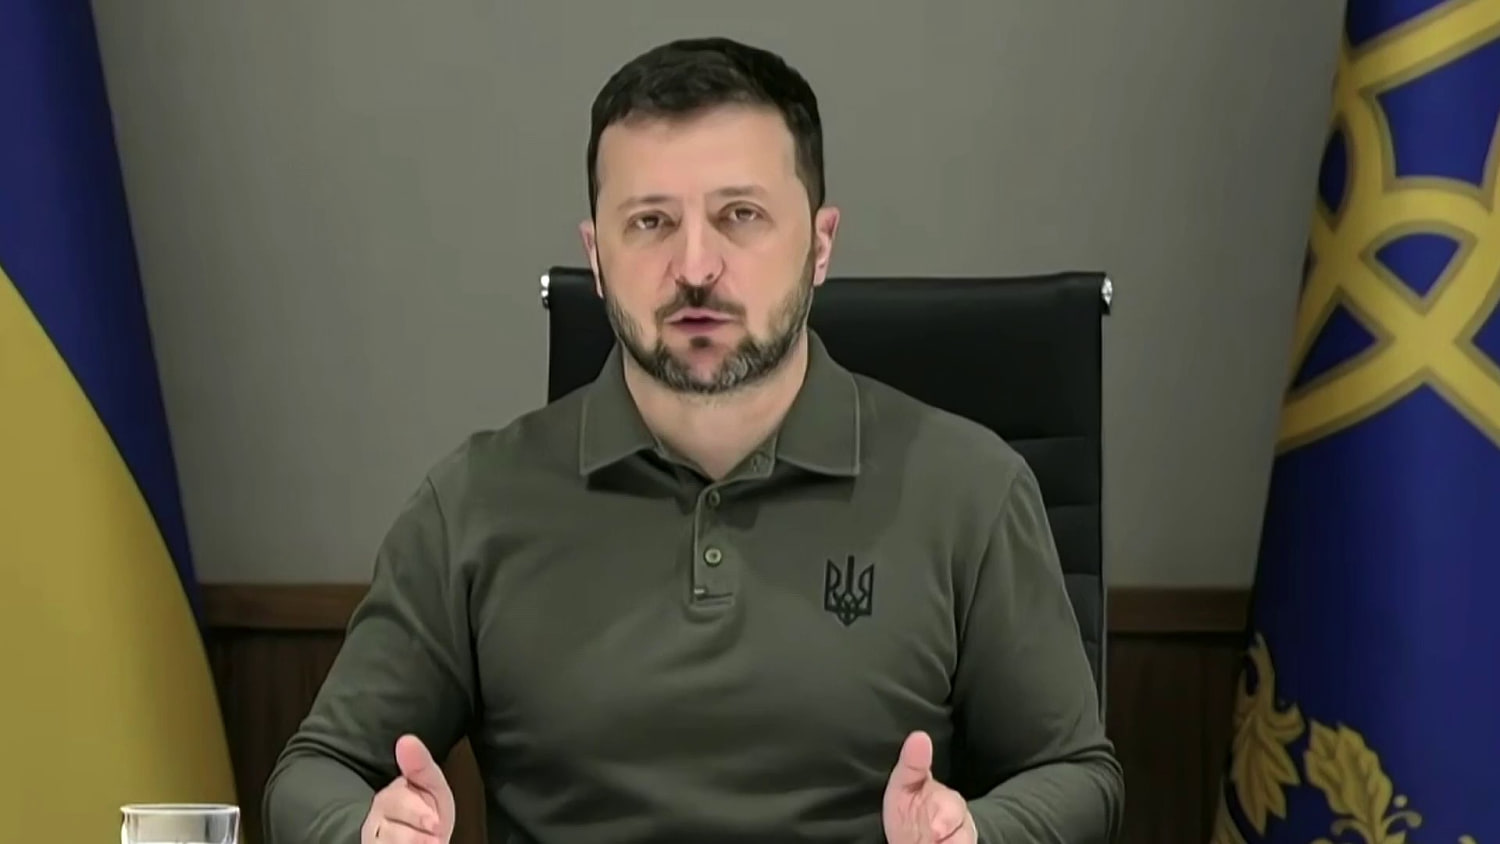 Americans are not ‘funding’ war in Ukraine, they’re ‘protecting freedom’: Full Zelenskyy interview